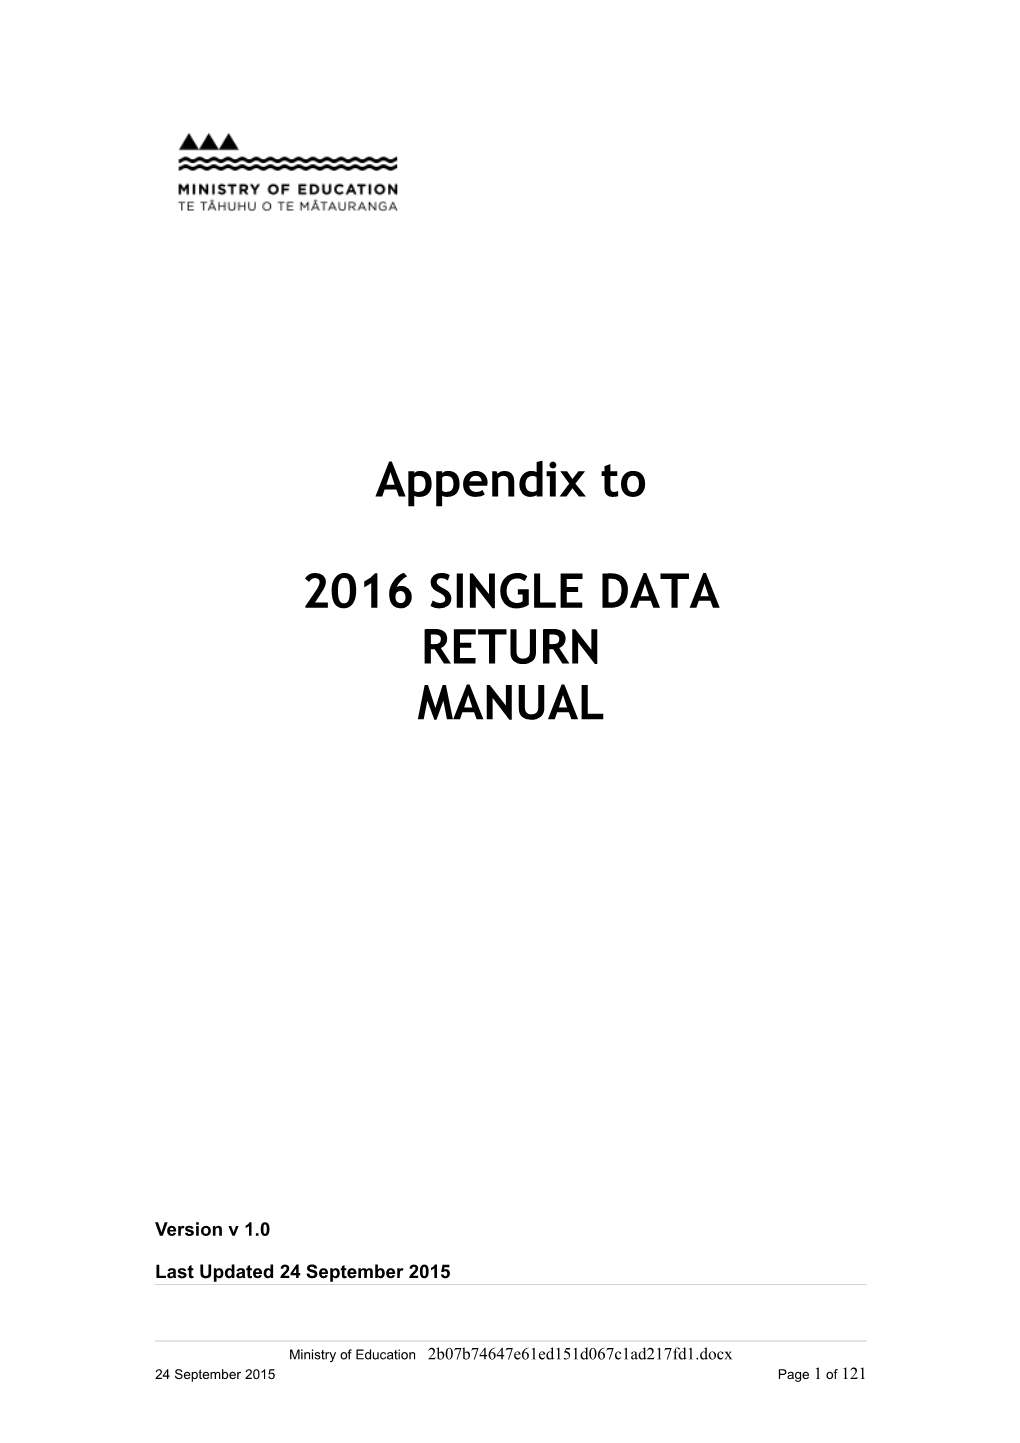 Ministry of Education - Single Data Return Manual Appendices 2016